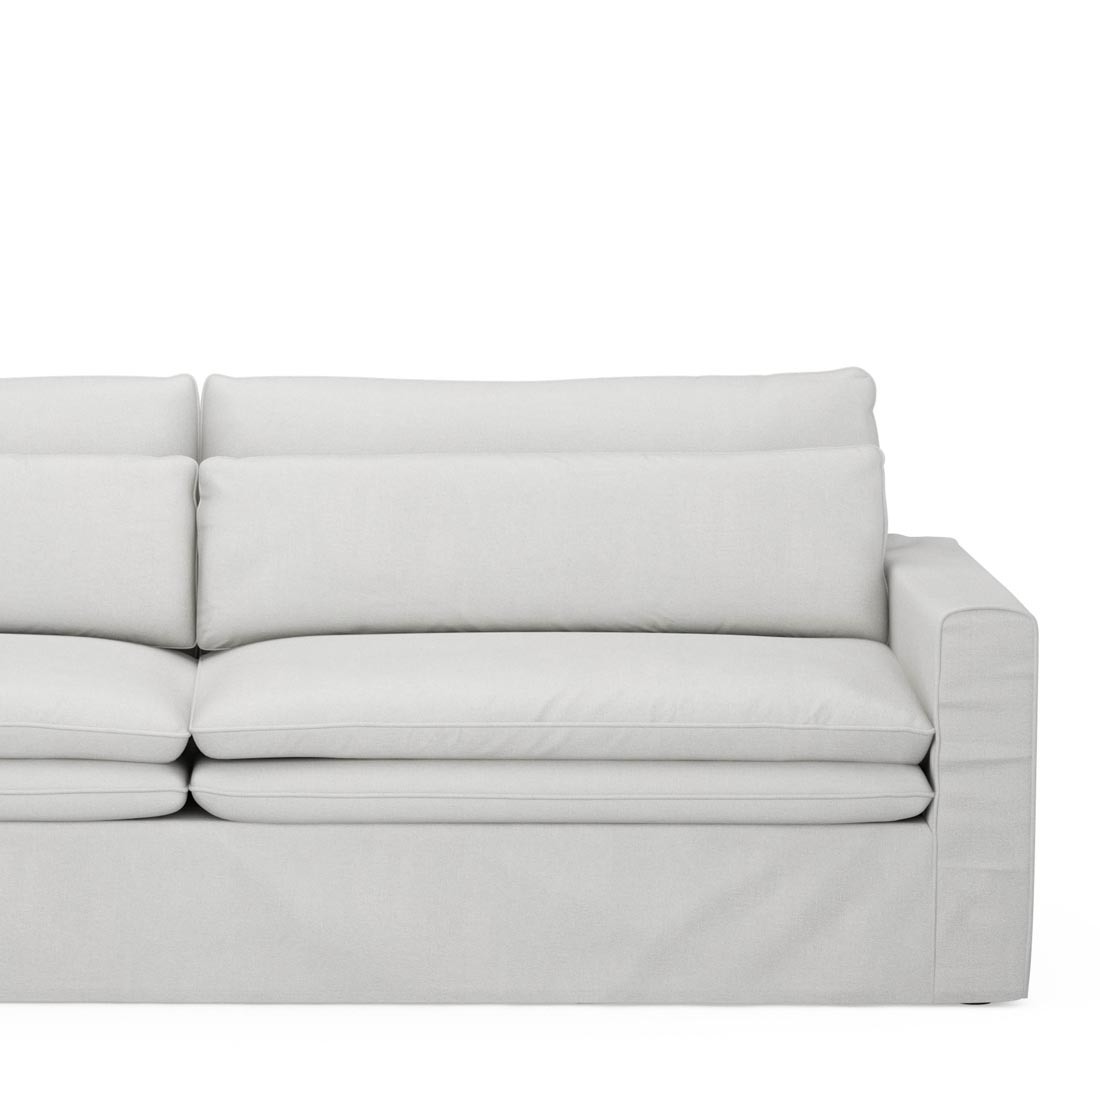 Continental Sofa 3,5 Seater, washed cotton, ash grey